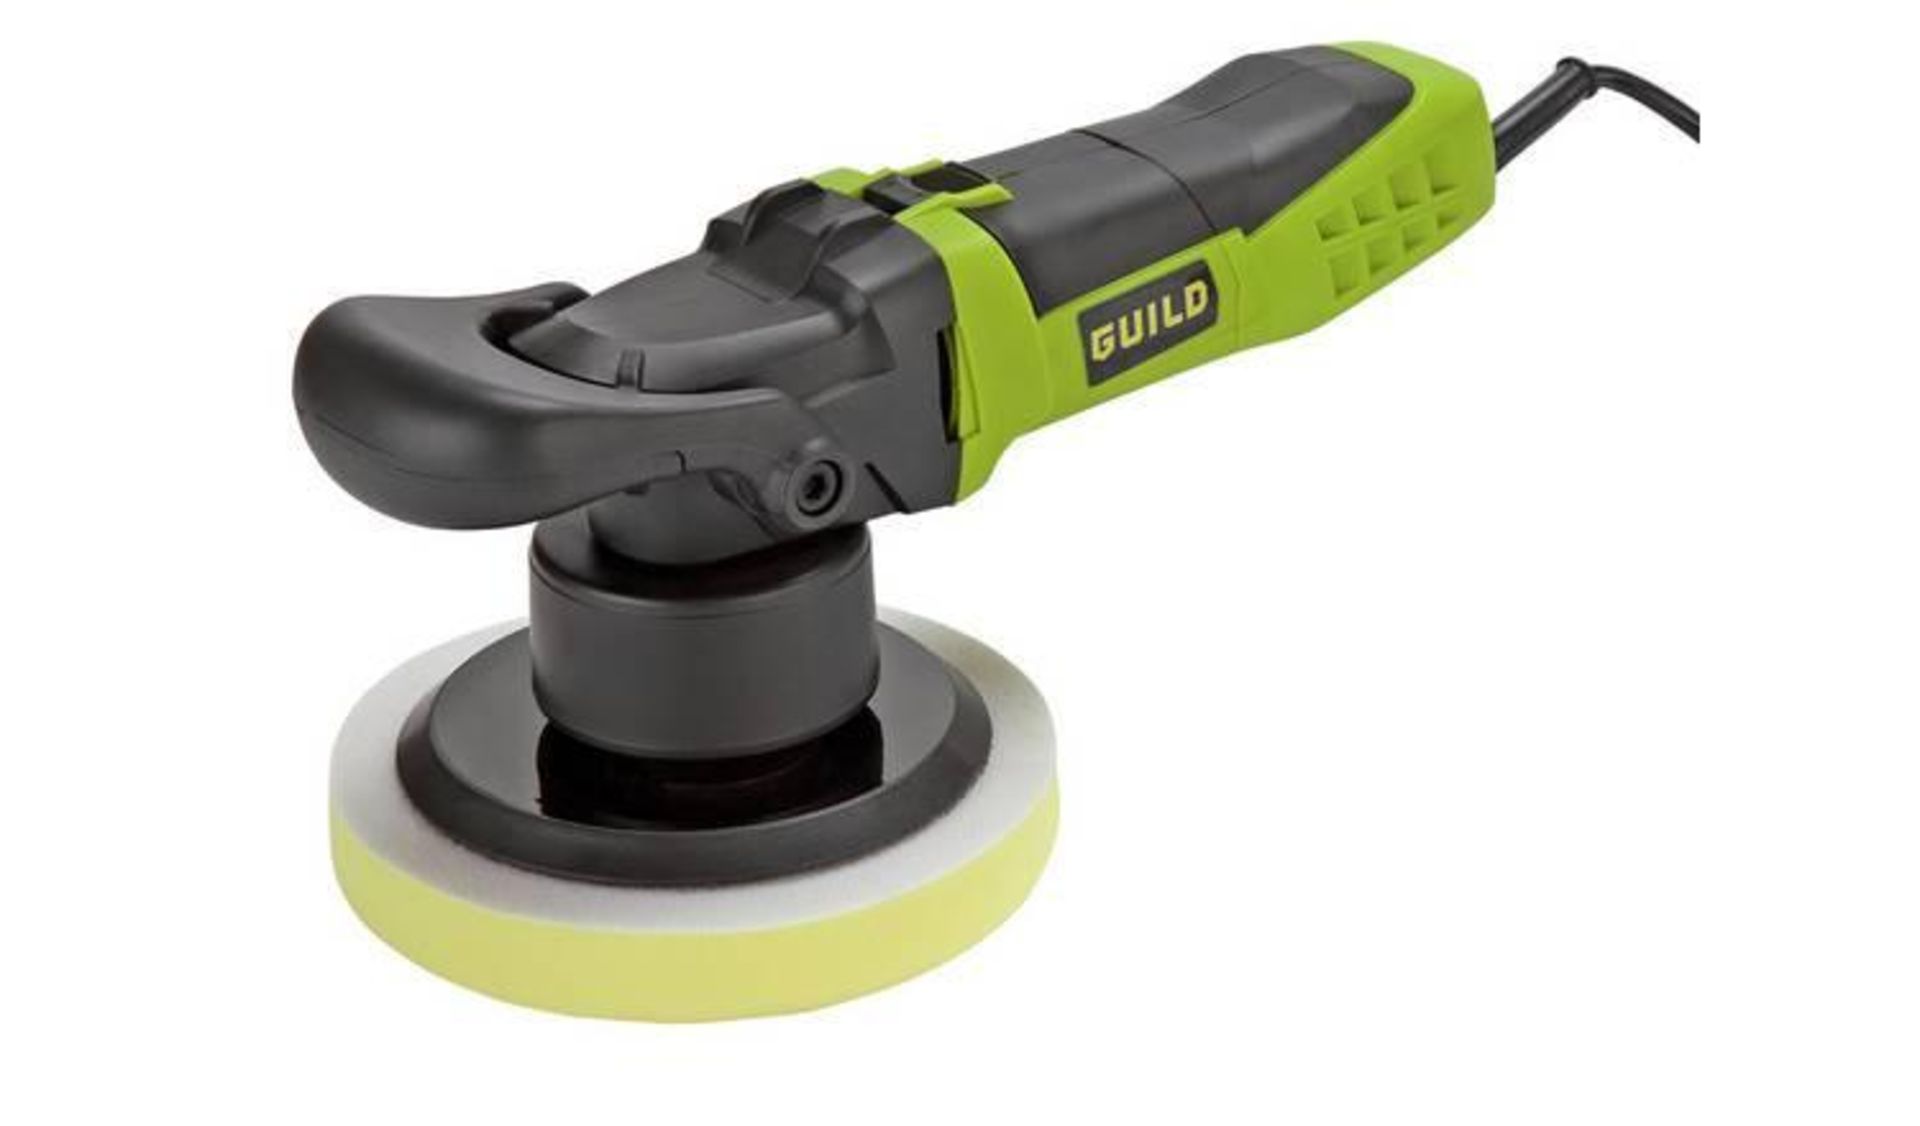 Guild Dual Action Car Polisher (864/7300) - £50.00 RRP